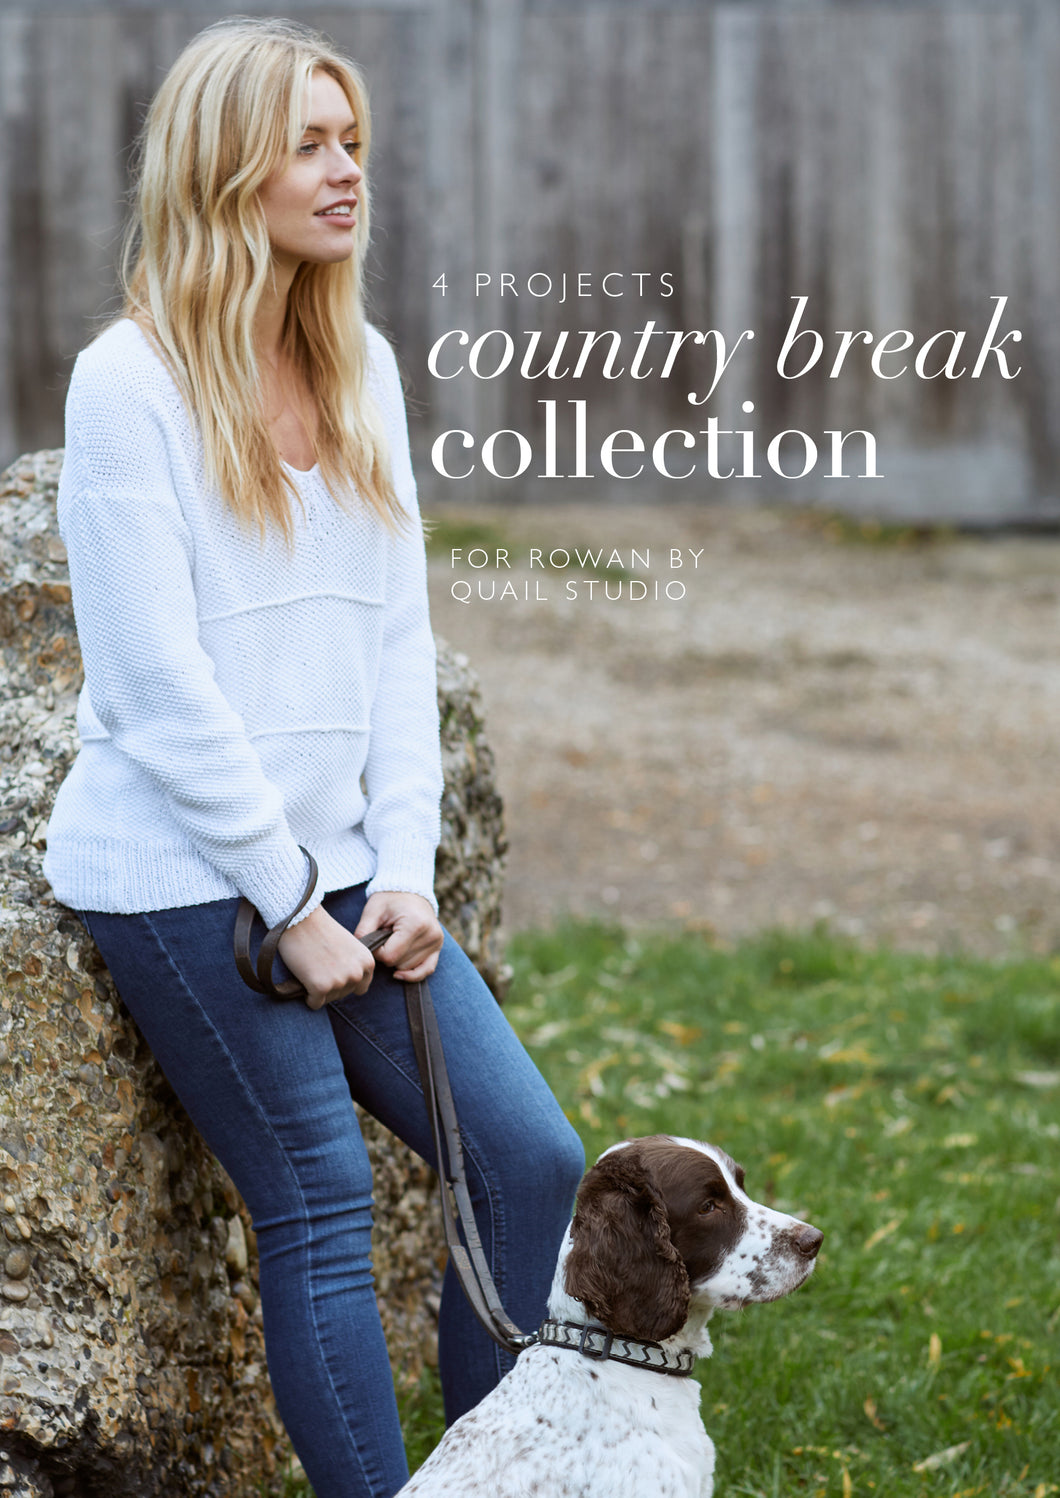 4 Projects Country Break Collection by Quail Studio